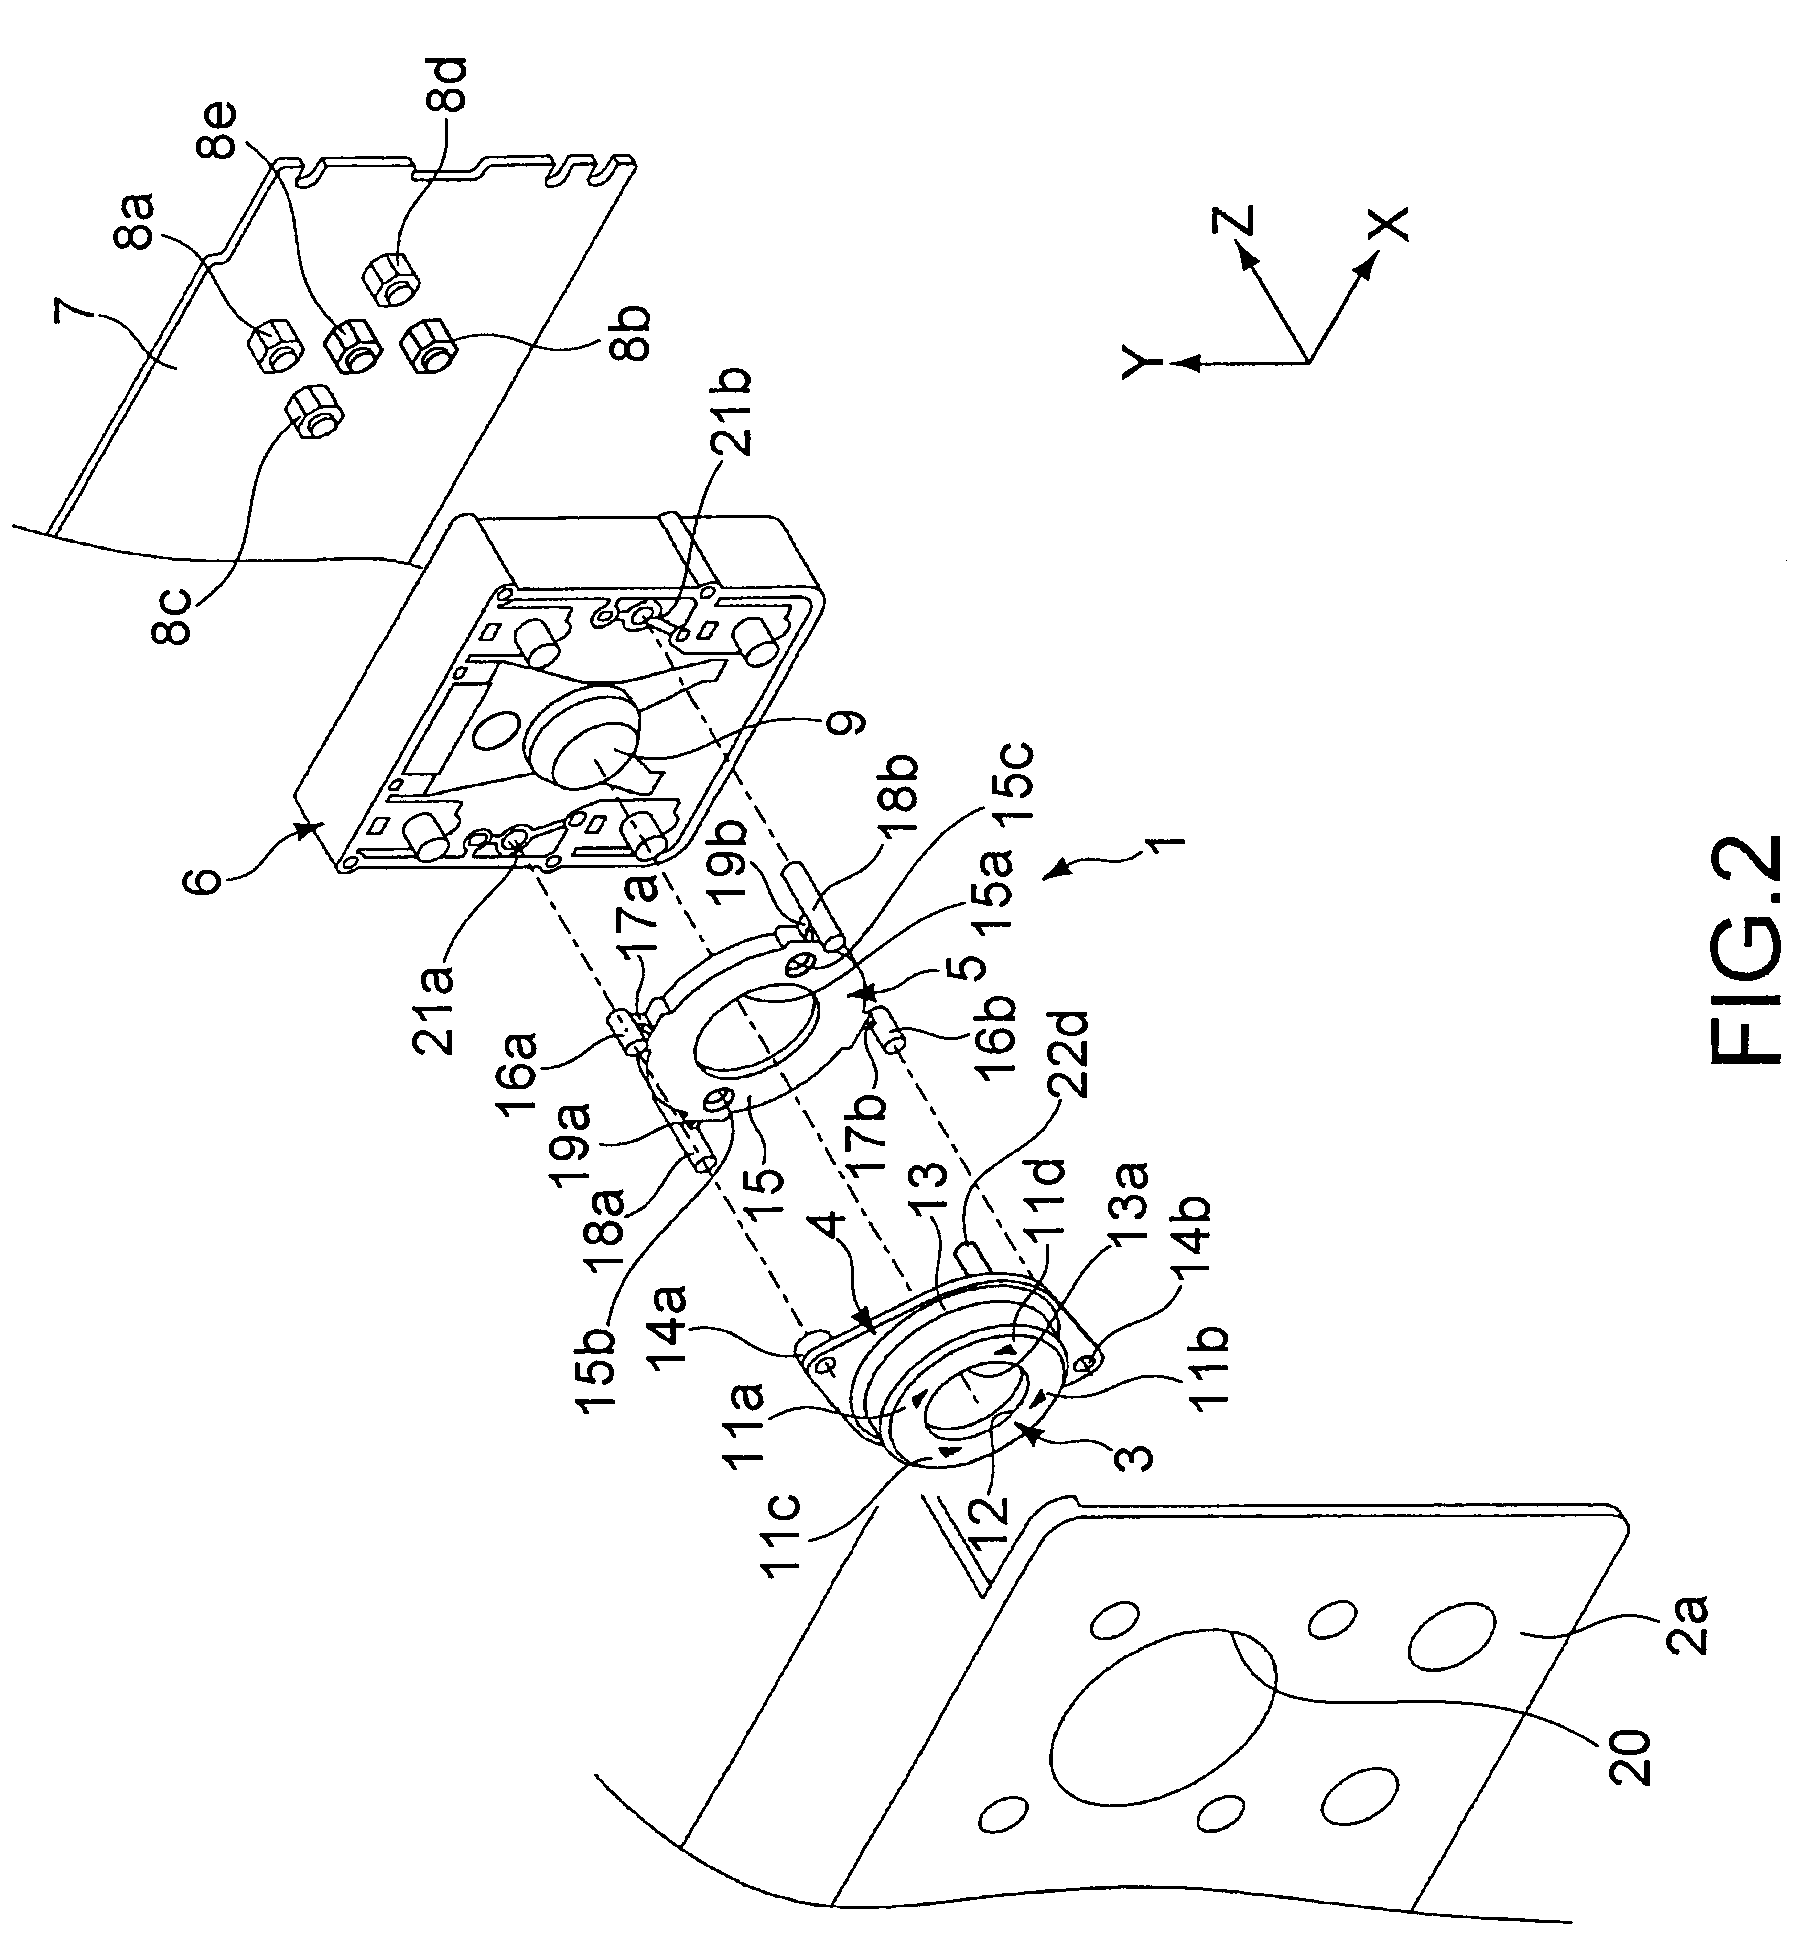 Multidirectional input apparatus and electronic device